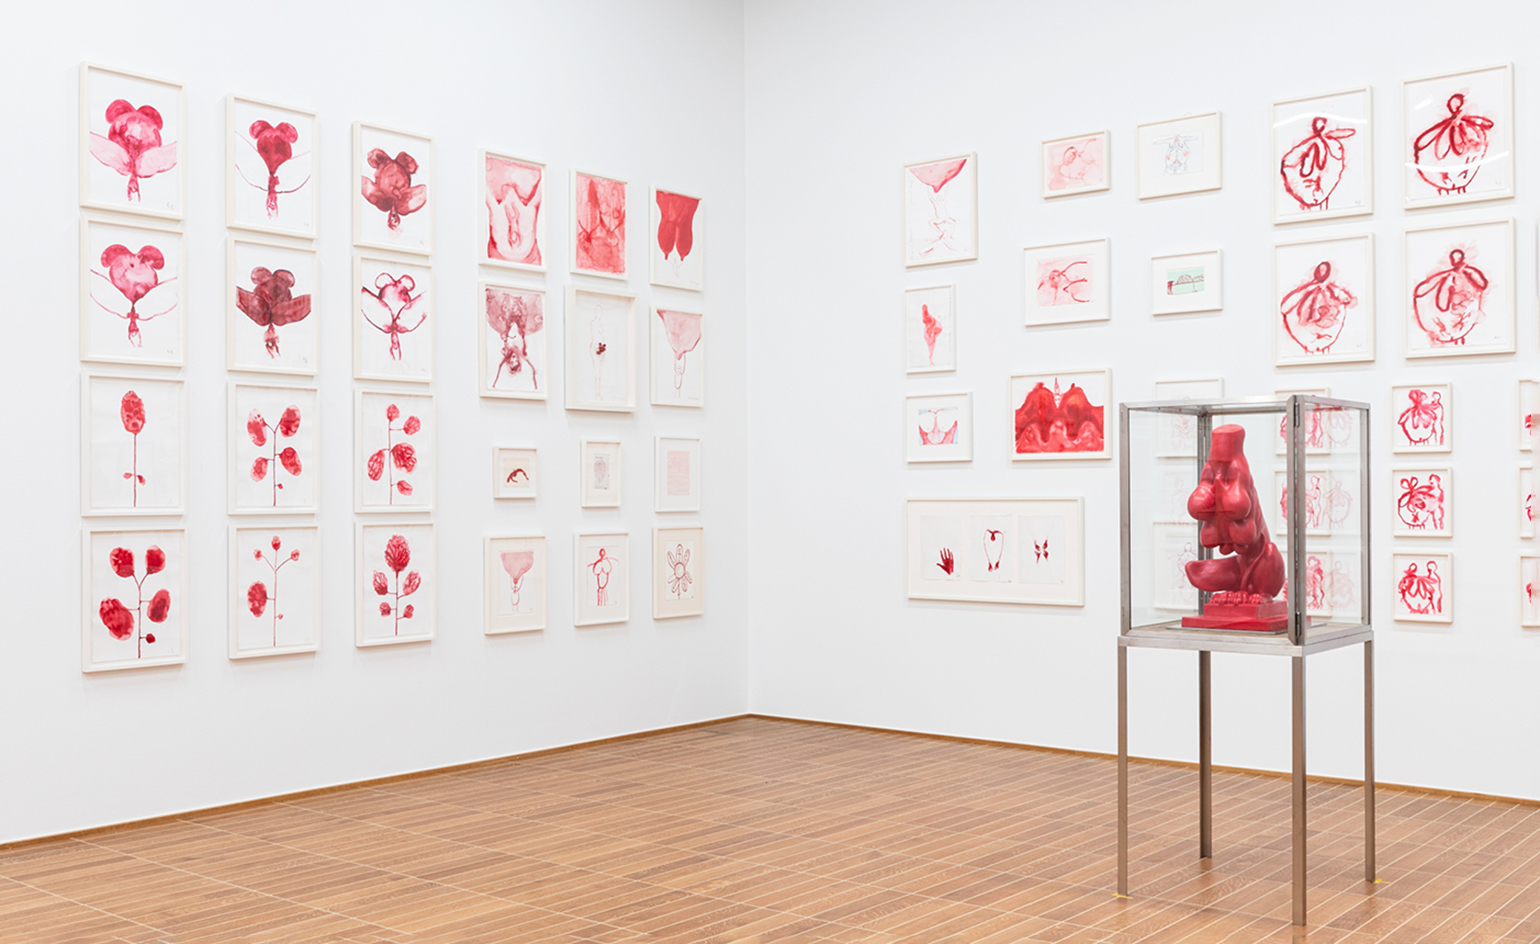 Louise Bourgeois — an artist trapped in her own skin